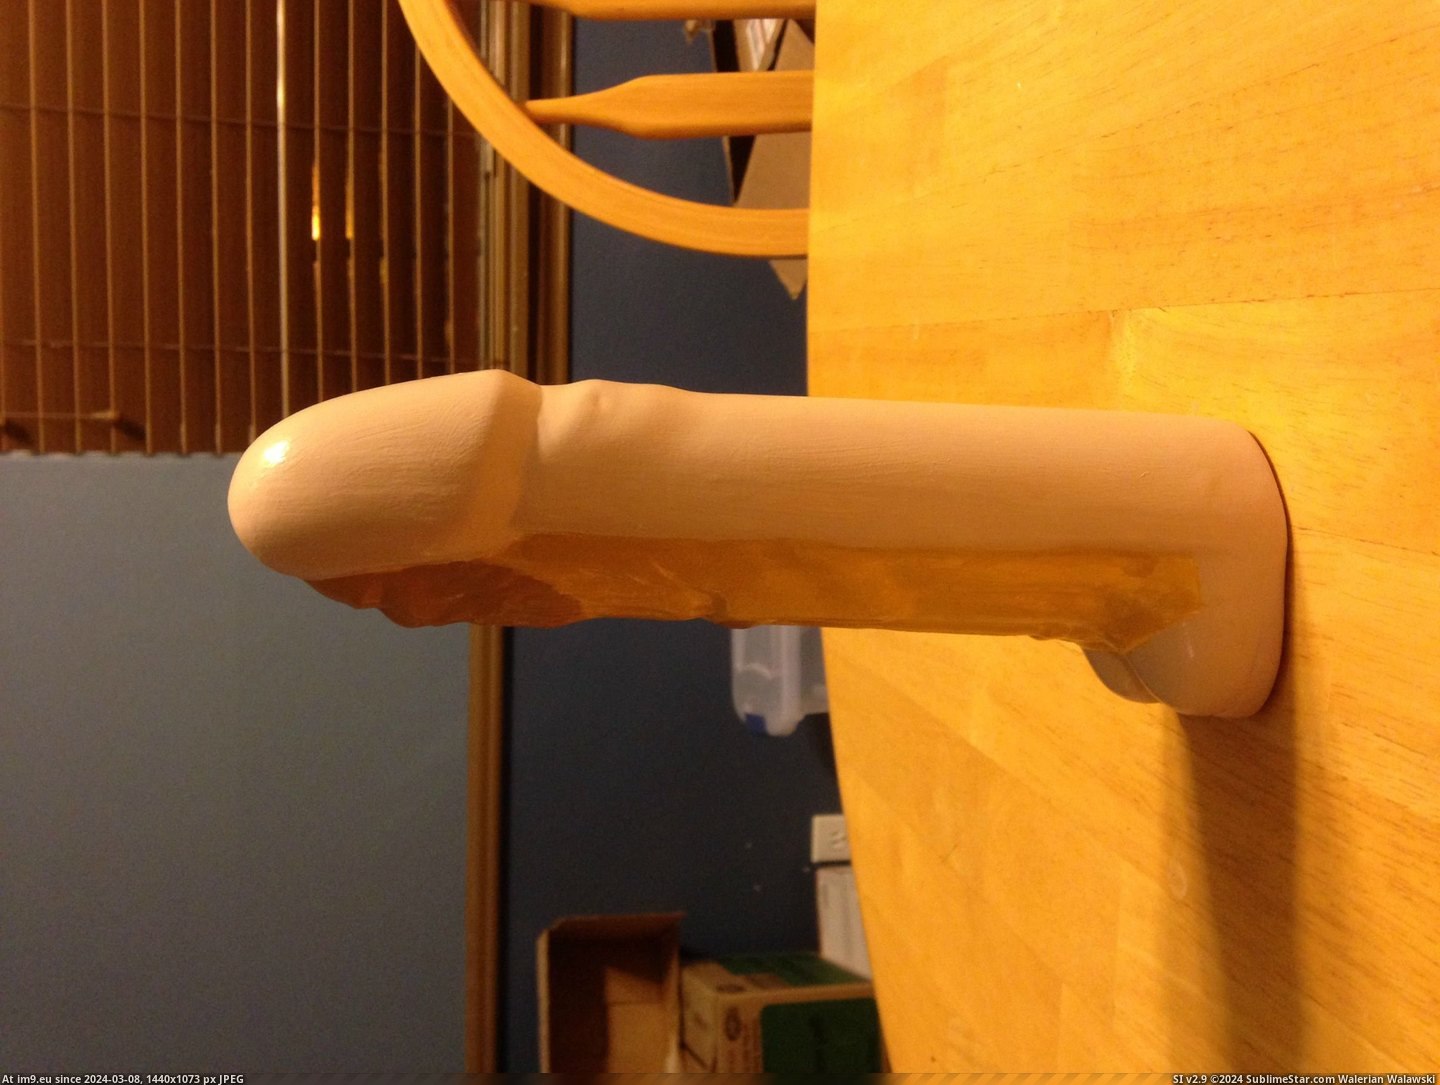 #Wtf #Art #Great #Out #Penis #Gave #Grandmother #Gifts #Got #She #Family #Boyfriend [Wtf] My Great-Grandmother got a boyfriend...so she made this penis art and gave it out as gifts to the family. [NSFW] 5 Pic. (Изображение из альбом My r/WTF favs))